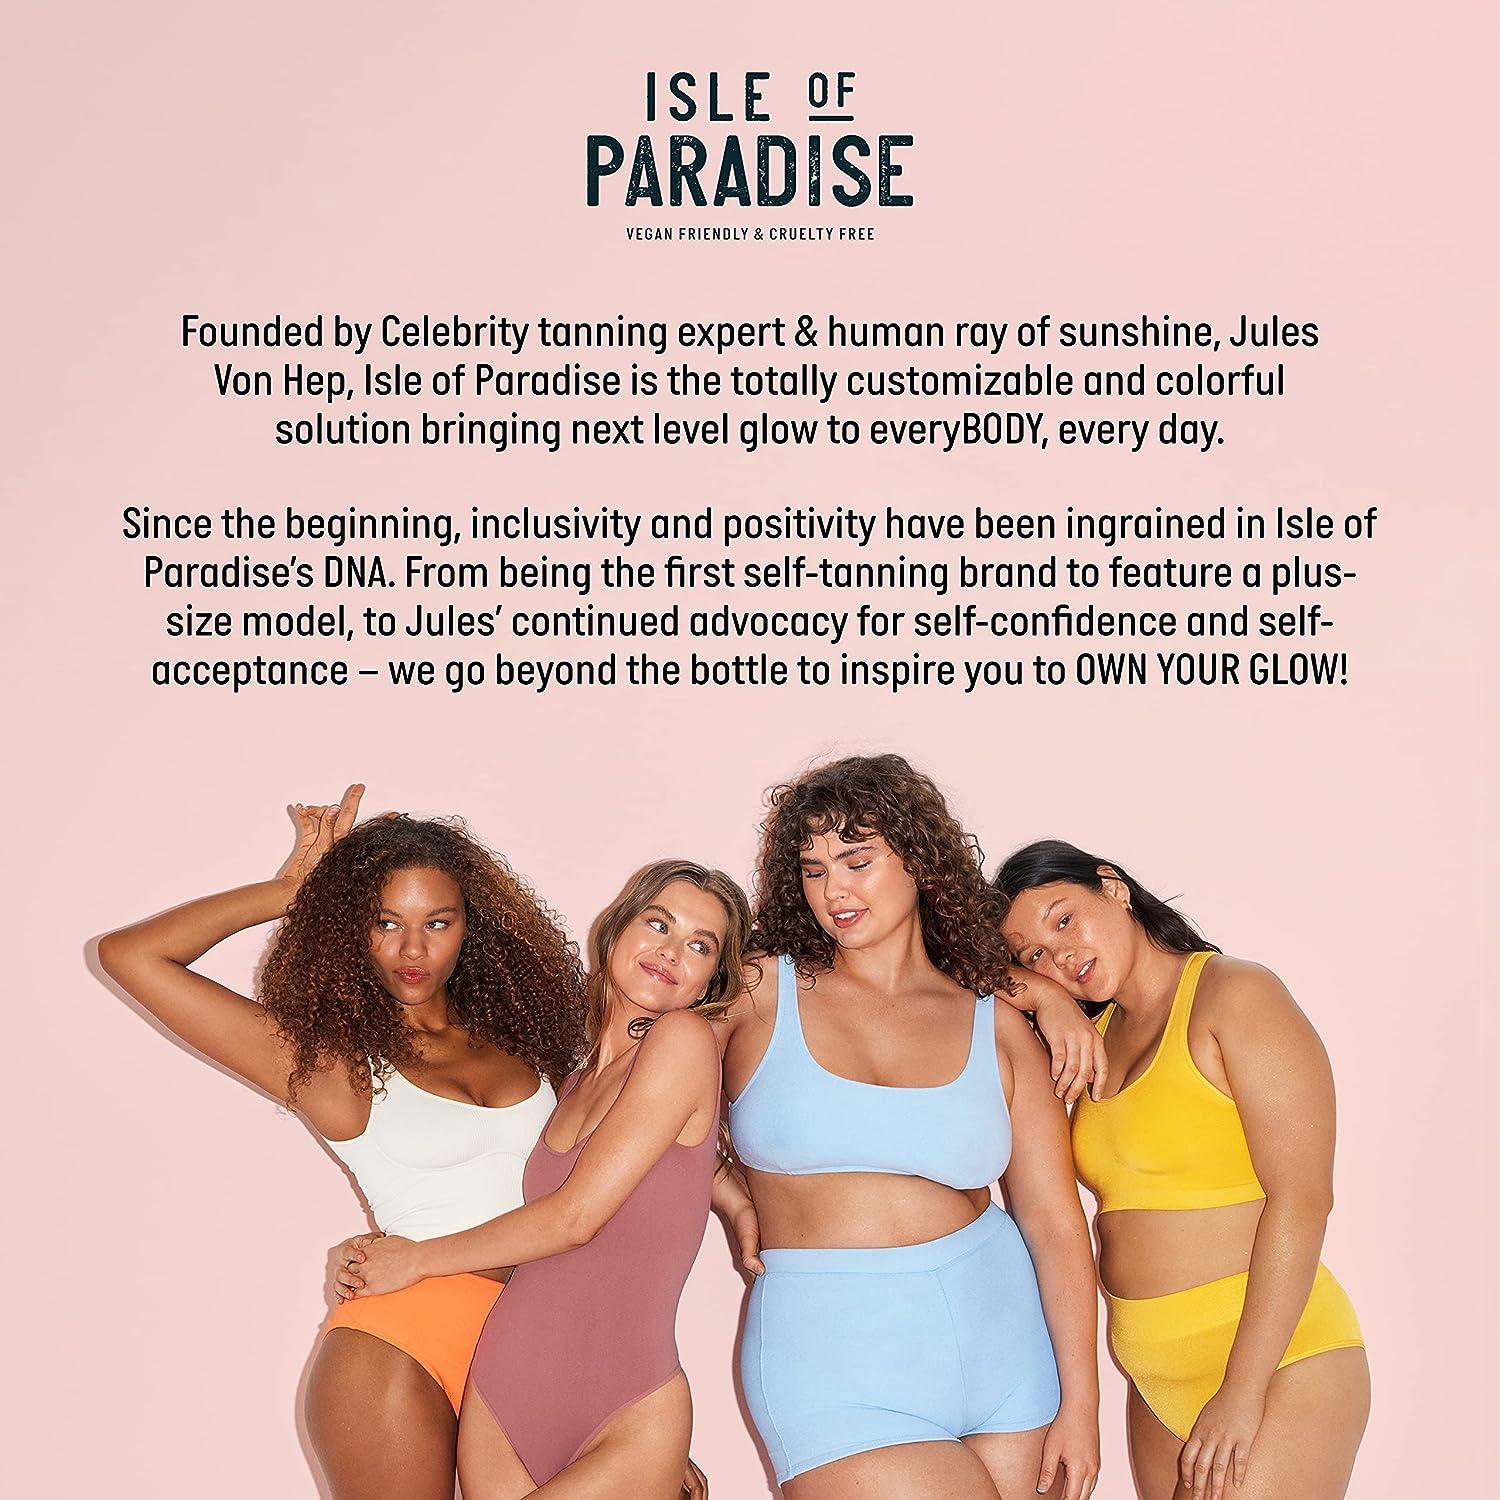 Get $140 Worth of Isle of Paradise Tanning Butter for $49 & Glow On